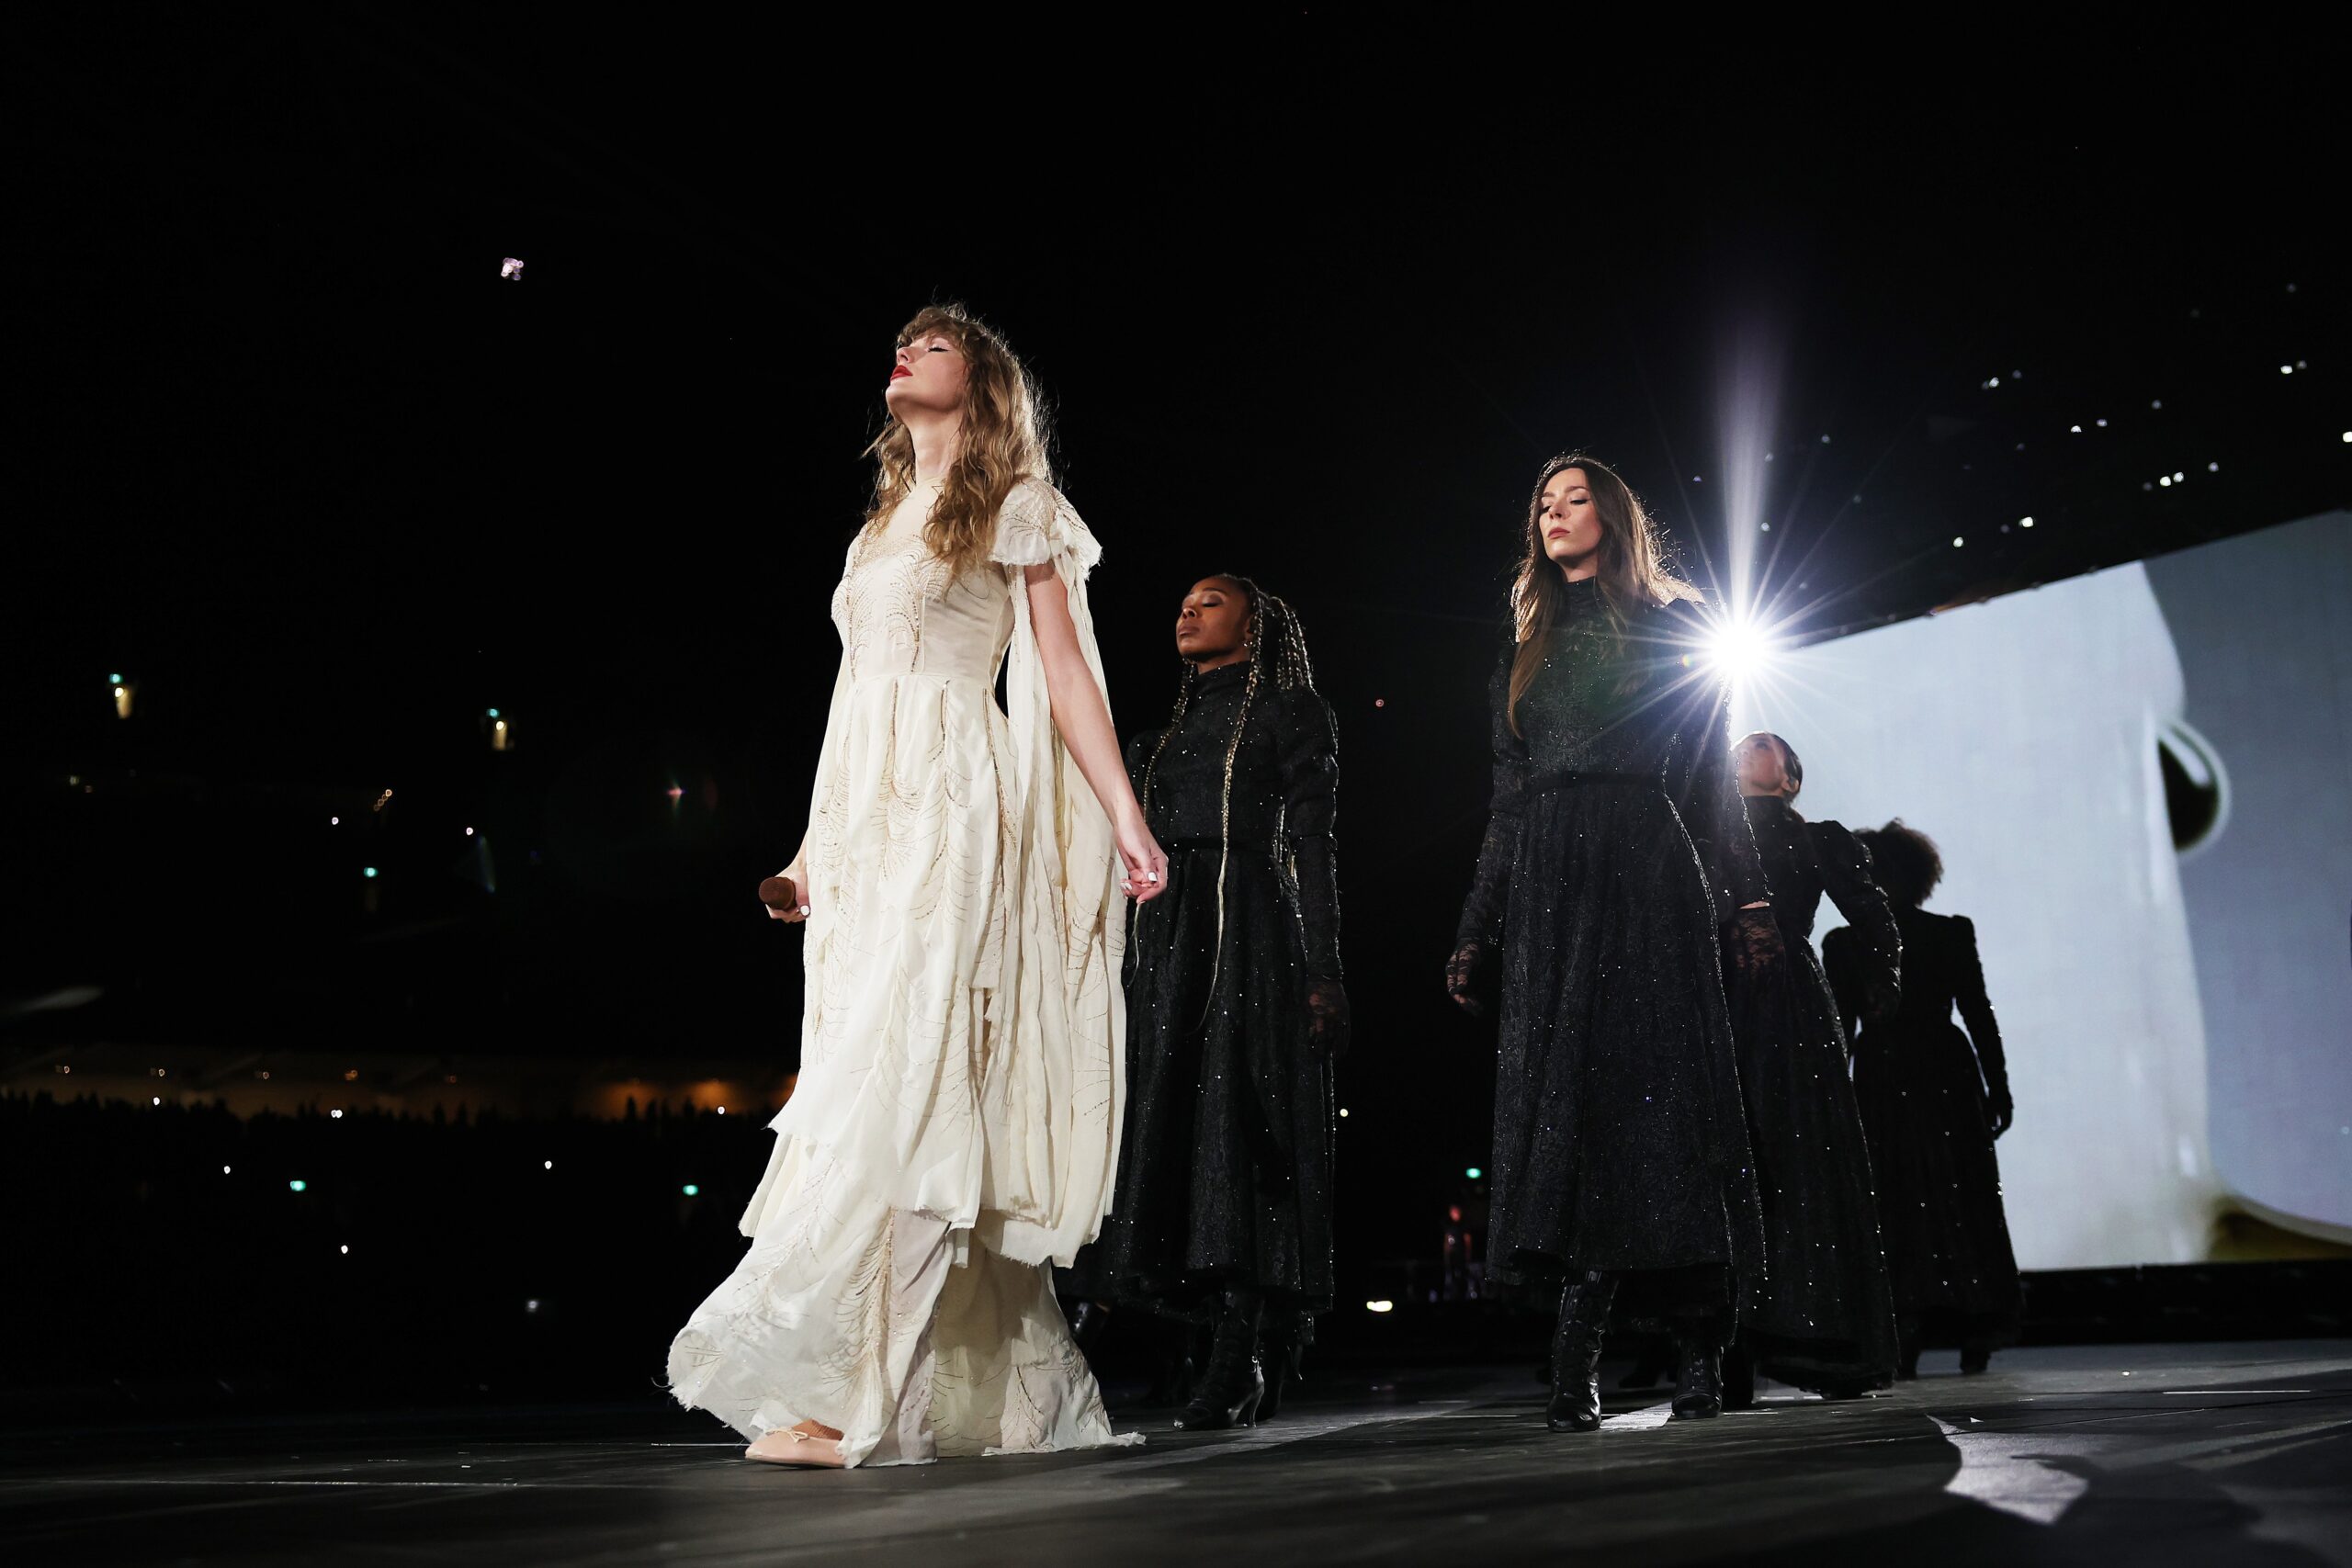 Taylor Swift performing in a white dress surrounded by back up dancers in black outfits creating a haunting image. 